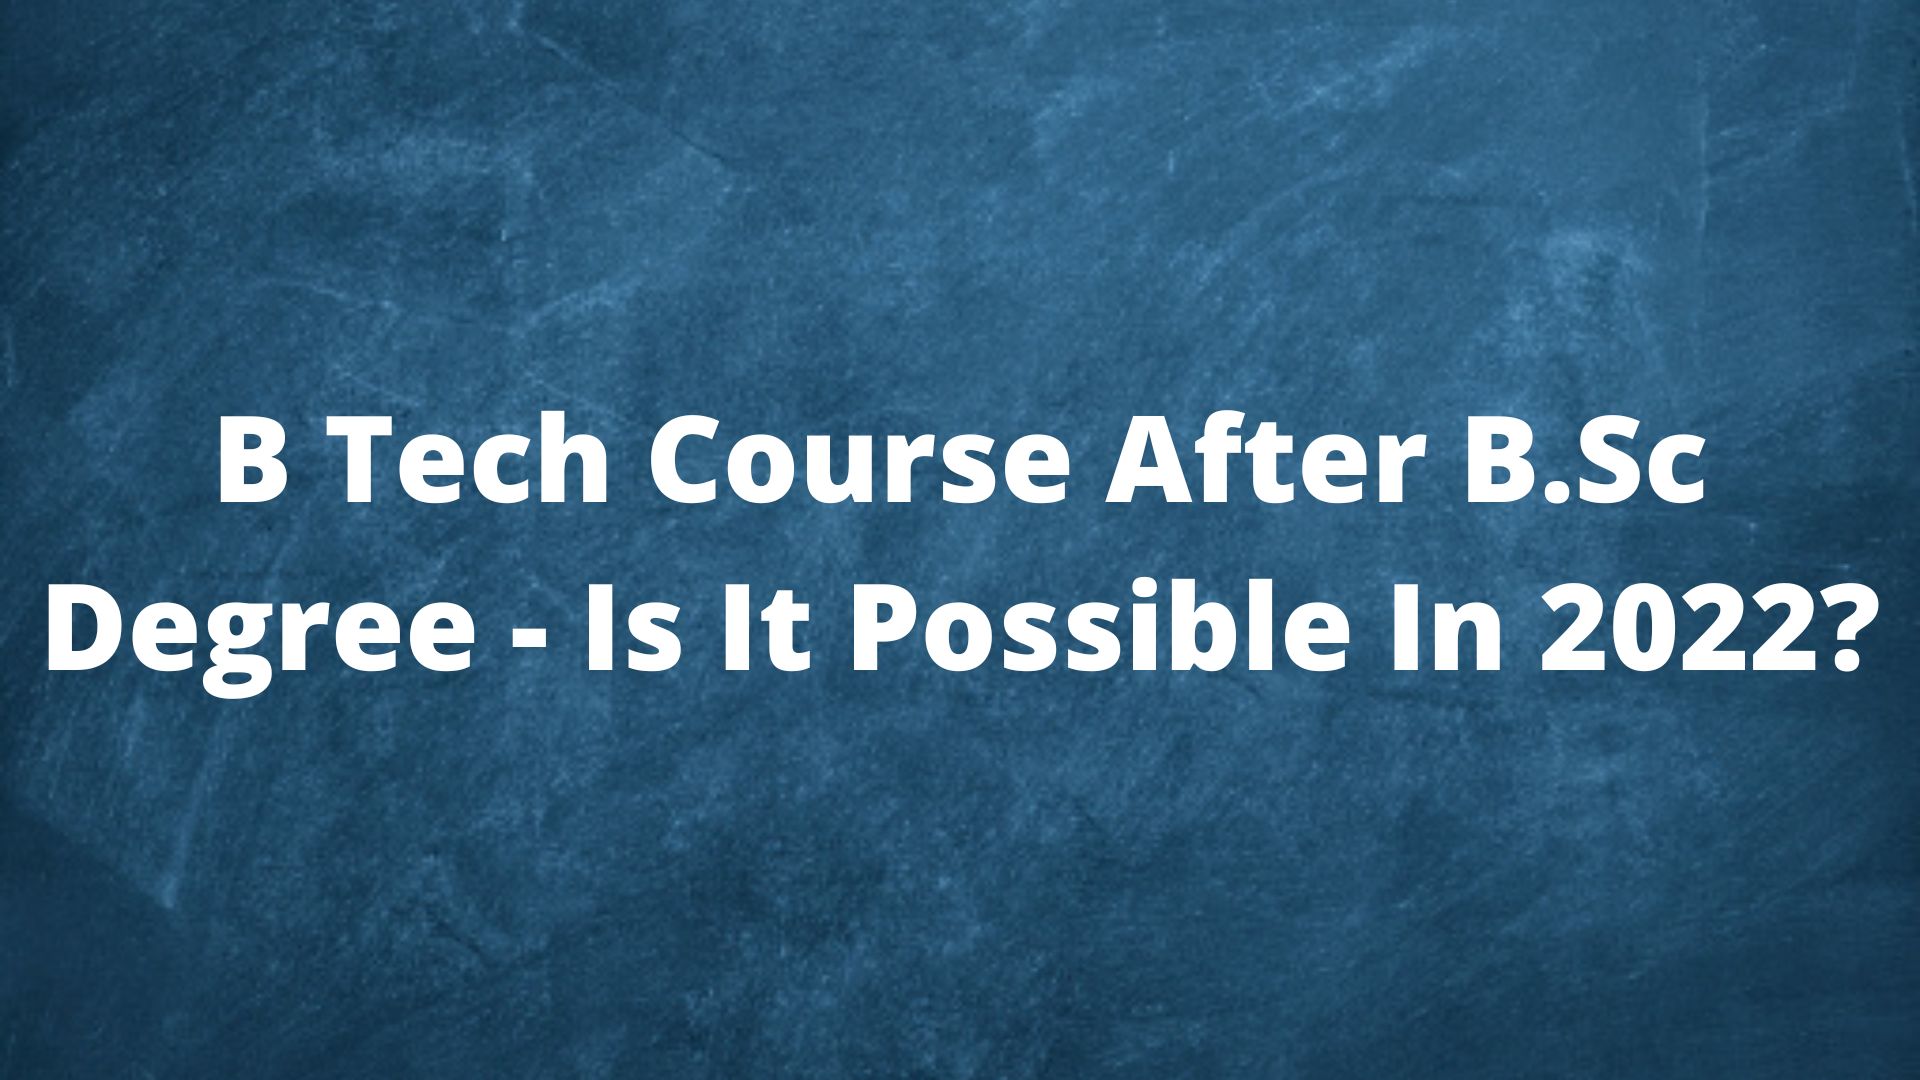 B Tech Course After B.Sc Degree - Is It Possible In 2022?